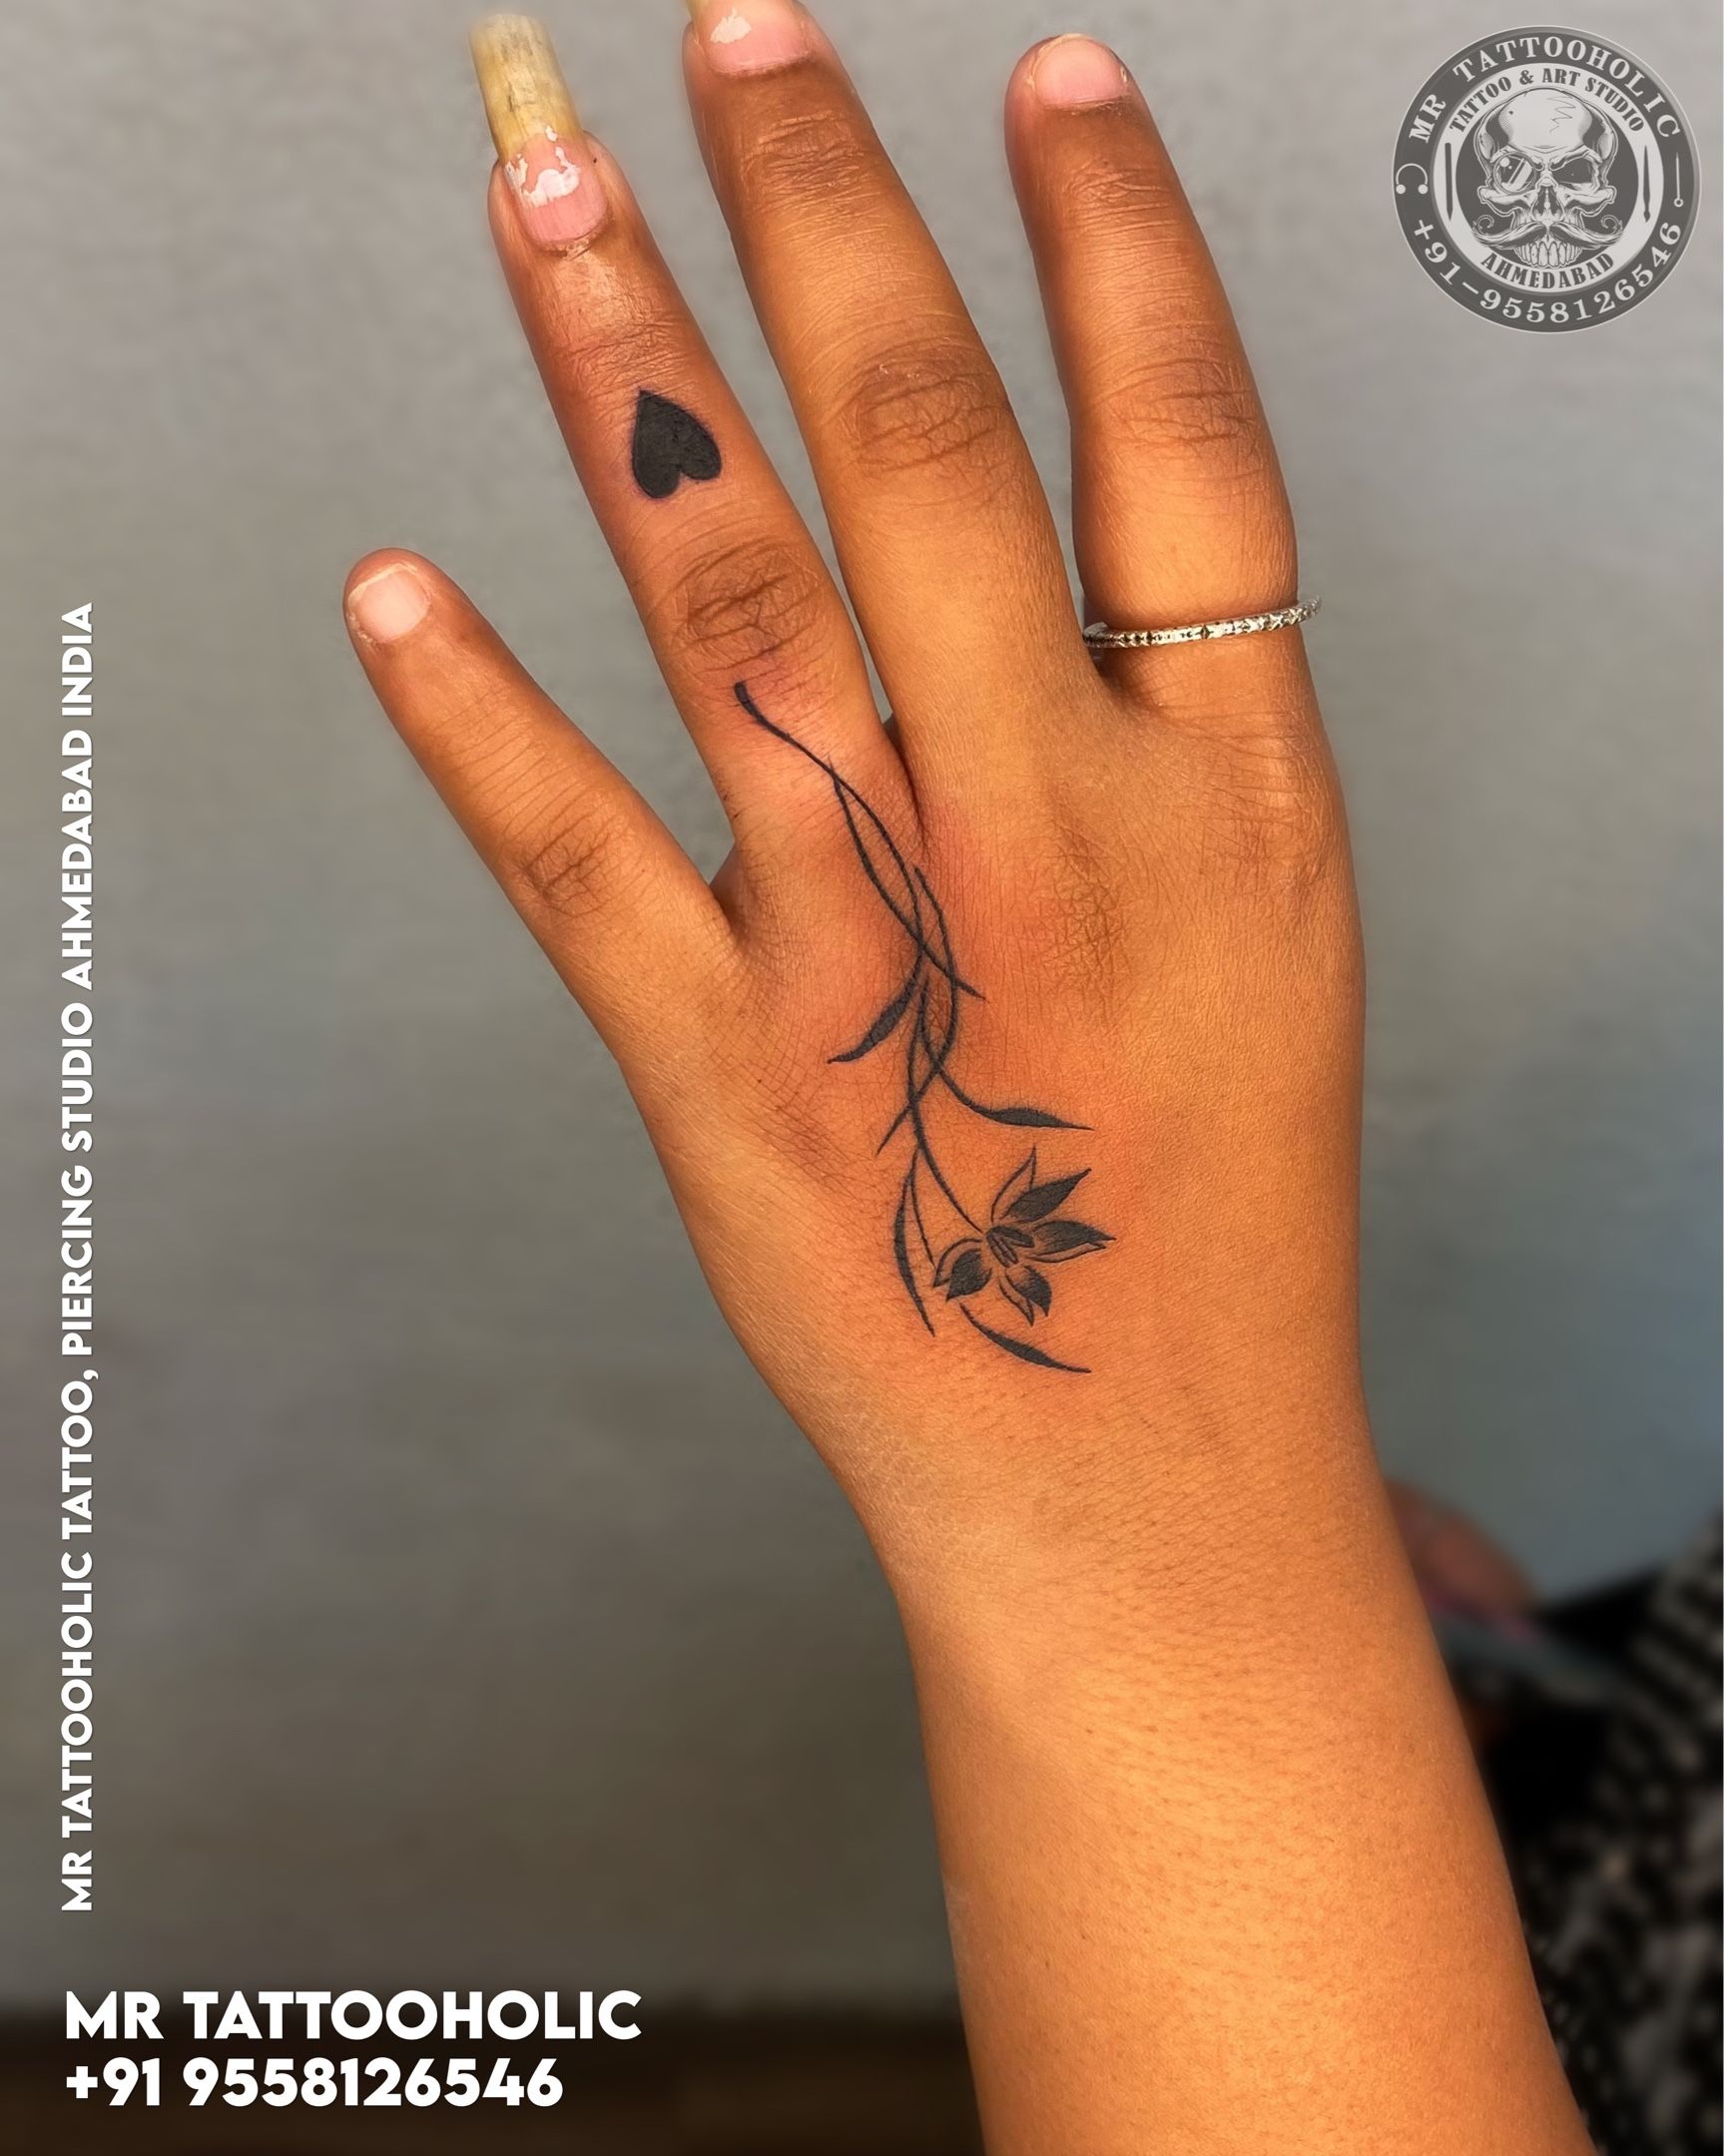 Free Images : hand, pattern, finger, tattoo, arm, nail, chest, colors,  design, bodypaint, body arts 5616x3744 - - 1337584 - Free stock photos -  PxHere